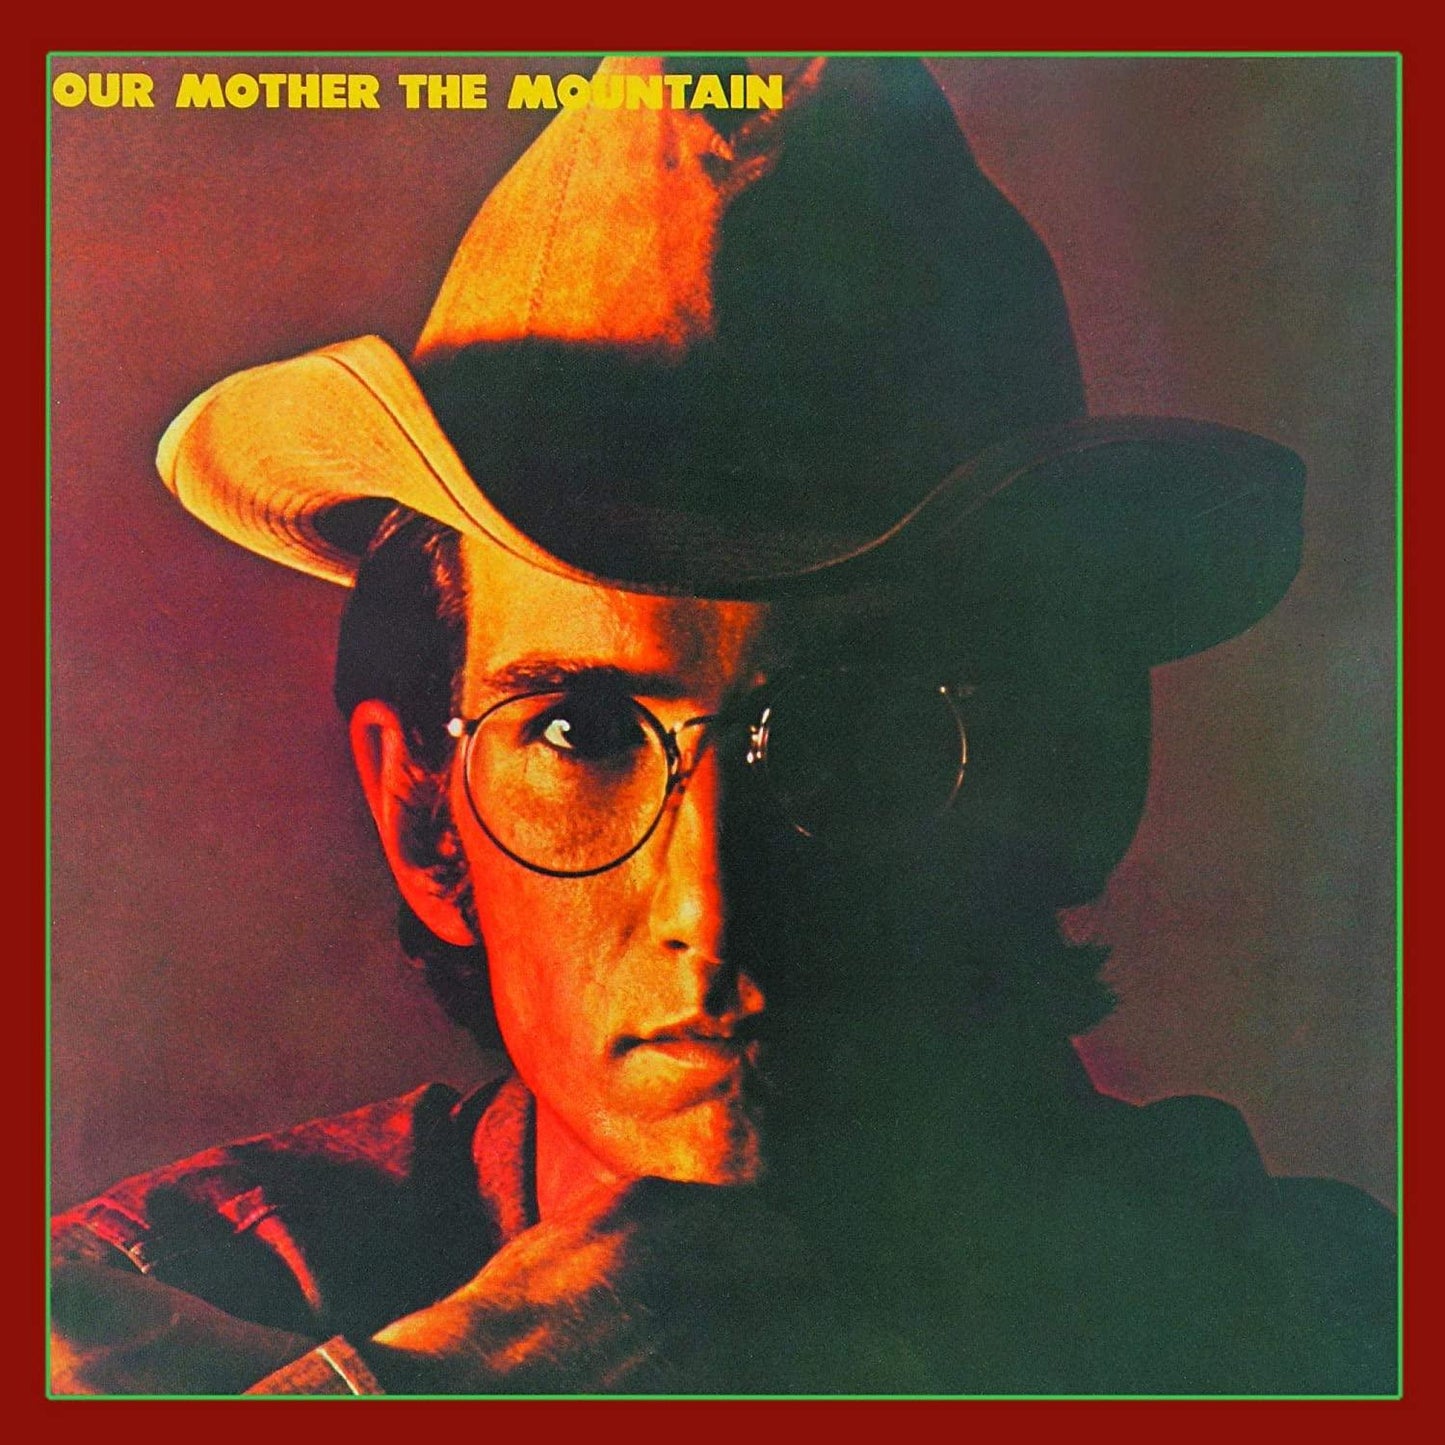 Townes Van Zandt - Our Mother The Mountain (Remastered, 180 Gram) (LP) - Joco Records